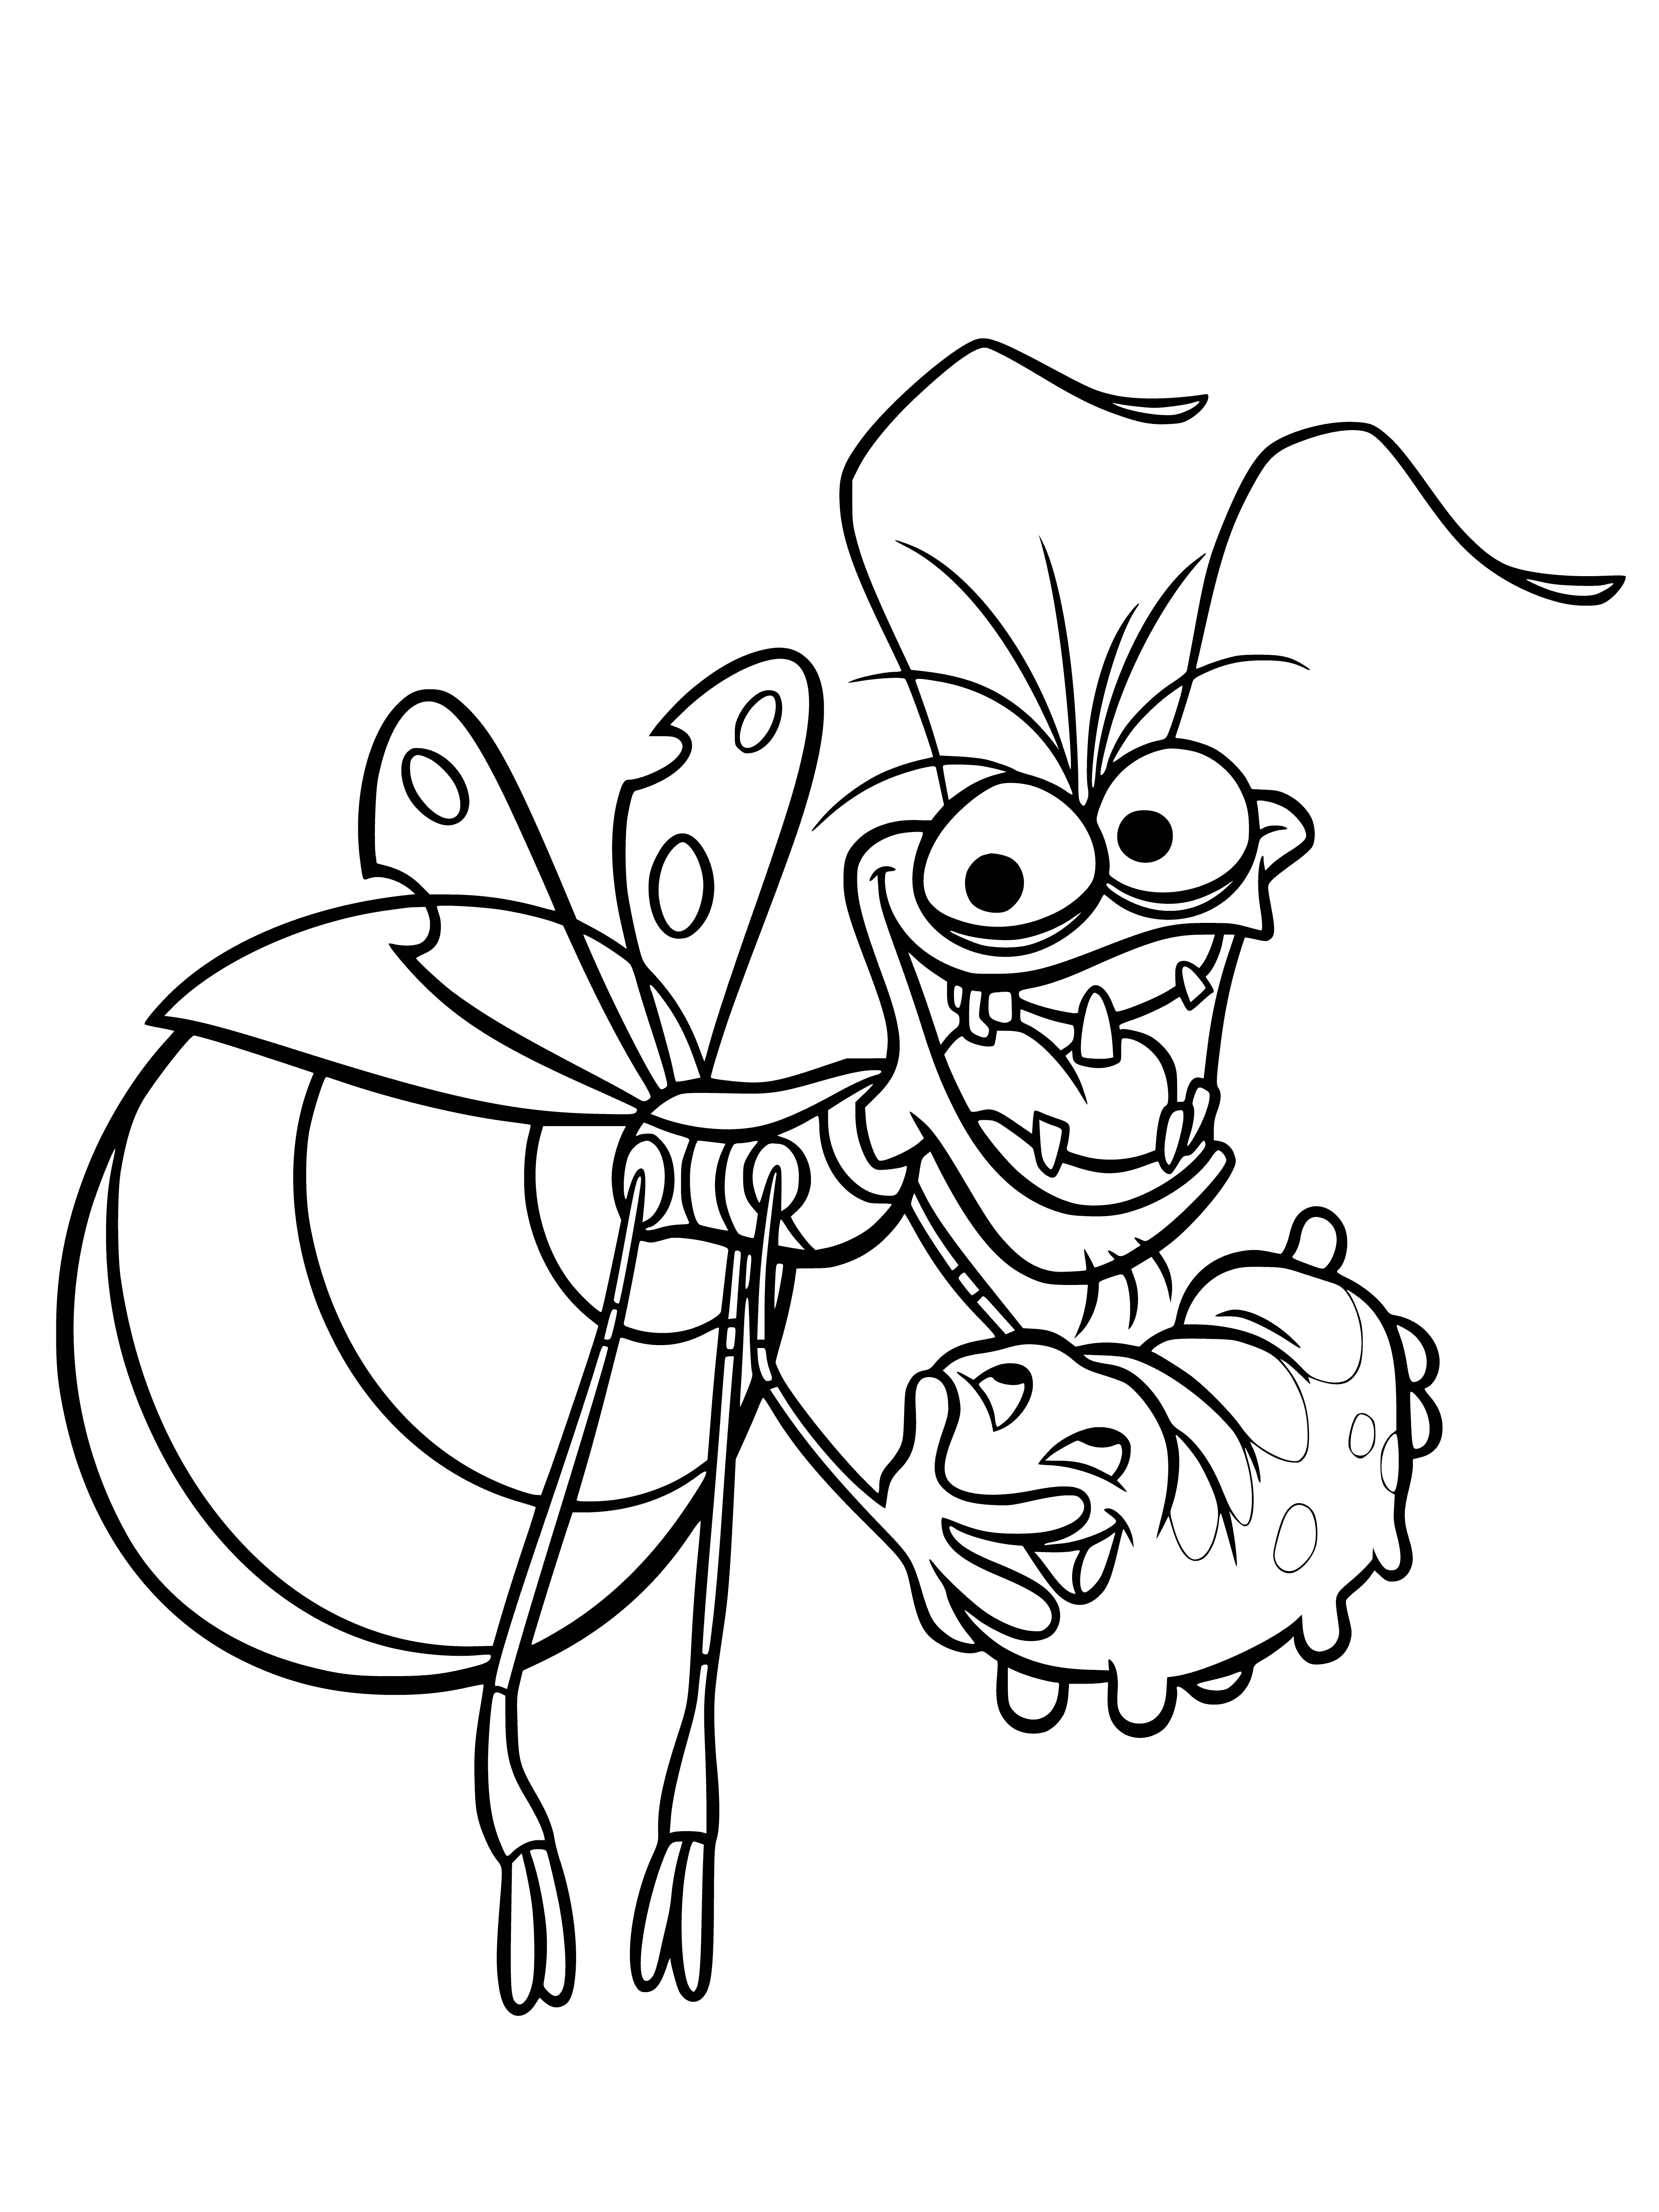 coloring page: Frog sits with firefly on nose, mouth open and tongue out, firefly's wings open.